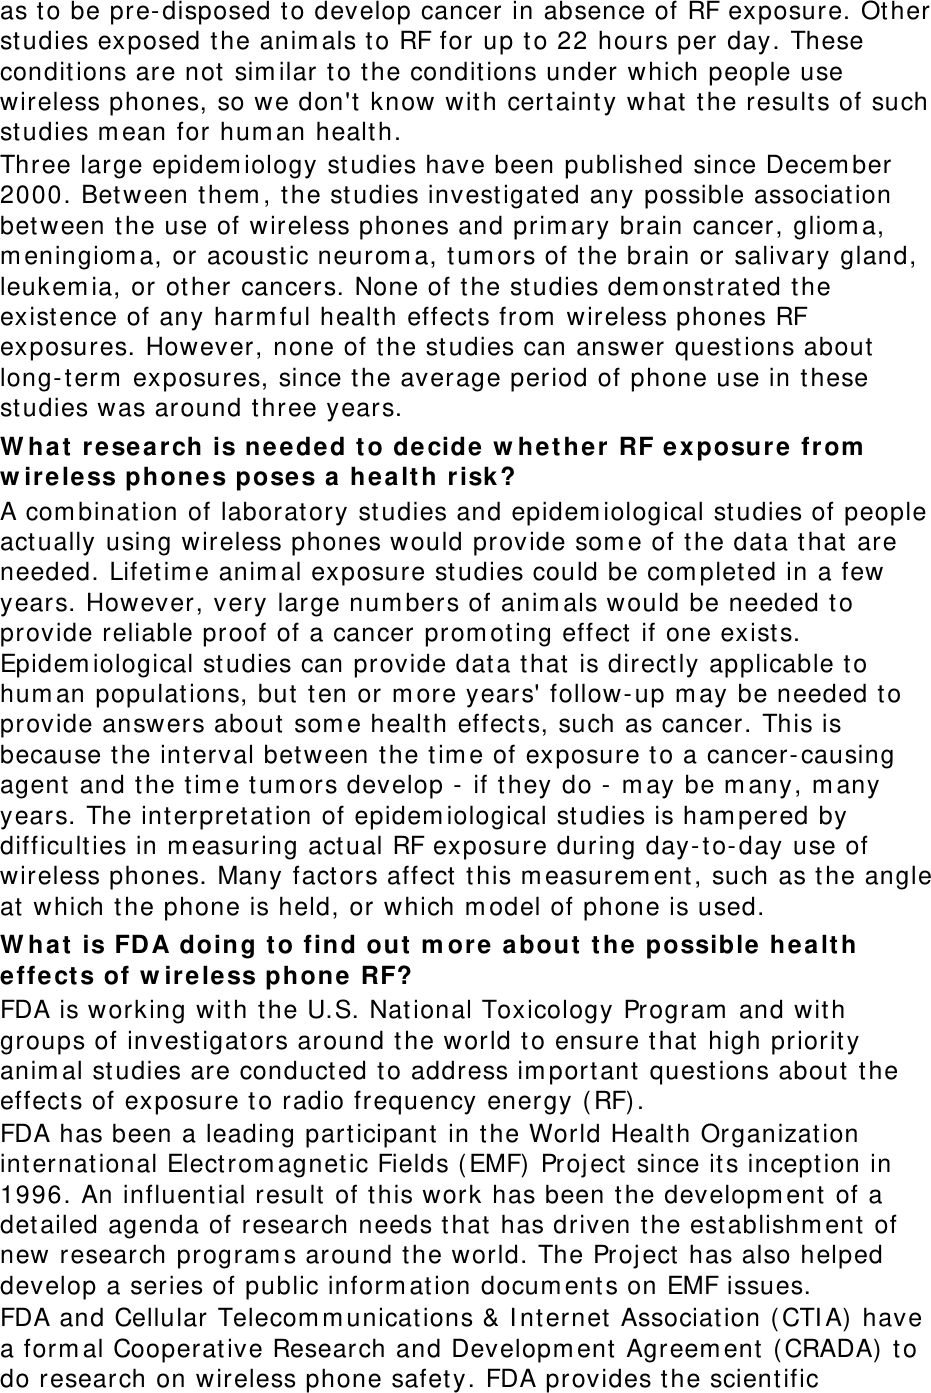 as to be pre- disposed to develop cancer in absence of RF exposure. Other studies exposed the anim als to RF for up t o 22 hours per day. These conditions are not  sim ilar t o t he condit ions under which people use wireless phones, so we don&apos;t know wit h cert ainty what  the results of such studies m ean for hum an health. Three large epidem iology st udies have been published since Decem ber 2000. Bet ween them , t he st udies investigat ed any possible association bet ween the use of wireless phones and prim ary brain cancer, gliom a, m eningiom a, or acoustic neurom a, tum ors of t he brain or salivary gland, leukem ia, or other cancers. None of t he st udies dem onst rat ed t he exist ence of any harm ful health effect s from  wireless phones RF exposures. However, none of t he st udies can answer quest ions about  long- t erm  exposures, since t he average period of phone use in t hese studies was around t hree years. W ha t  resea r ch is needed t o de cide w het her  RF exposure  from  w ir ele ss phones pose s a hea lt h r isk ? A com binat ion of laborat ory st udies and epidem iological st udies of people act ually using wireless phones would provide som e of t he dat a that are needed. Lifet im e anim al exposure st udies could be com plet ed in a few years. However, very large num bers of anim als would be needed t o provide reliable proof of a cancer prom ot ing effect  if one exist s. Epidem iological st udies can provide dat a that is direct ly applicable t o hum an populat ions, but ten or m ore years&apos; follow- up m ay be needed t o provide answers about  som e healt h effect s, such as cancer. This is because t he int erval bet ween the tim e of exposure t o a cancer- causing agent and t he tim e tum ors develop - if t hey do -  m ay be m any, m any years. The int erpret at ion of epidem iological st udies is ham pered by difficult ies in m easuring act ual RF exposure during day- to- day use of wireless phones. Many fact ors affect this m easurem ent , such as t he angle at which t he phone is held, or which m odel of phone is used. W ha t  is FDA doing t o find out  m ore a bout  t he  possible  he alt h effect s of w ire less phone RF? FDA is working wit h t he U.S. Nat ional Toxicology Program  and with groups of invest igators around t he world t o ensure that  high priority anim al st udies are conducted t o address im portant  quest ions about  t he effect s of exposure t o radio frequency energy ( RF). FDA has been a leading part icipant in the World Healt h Organizat ion int ernat ional Electrom agnet ic Fields ( EMF)  Proj ect  since it s incept ion in 1996. An influential result of this work has been the developm ent of a det ailed agenda of research needs t hat  has driven the est ablishm ent  of new research program s around the world. The Proj ect has also helped develop a series of public inform at ion docum ents on EMF issues. FDA and Cellular Telecom m unicat ions &amp; I nternet Associat ion (CTI A)  have a form al Cooperat ive Research and Developm ent Agreem ent  ( CRADA)  t o do research on wireless phone safet y. FDA provides t he scientific 